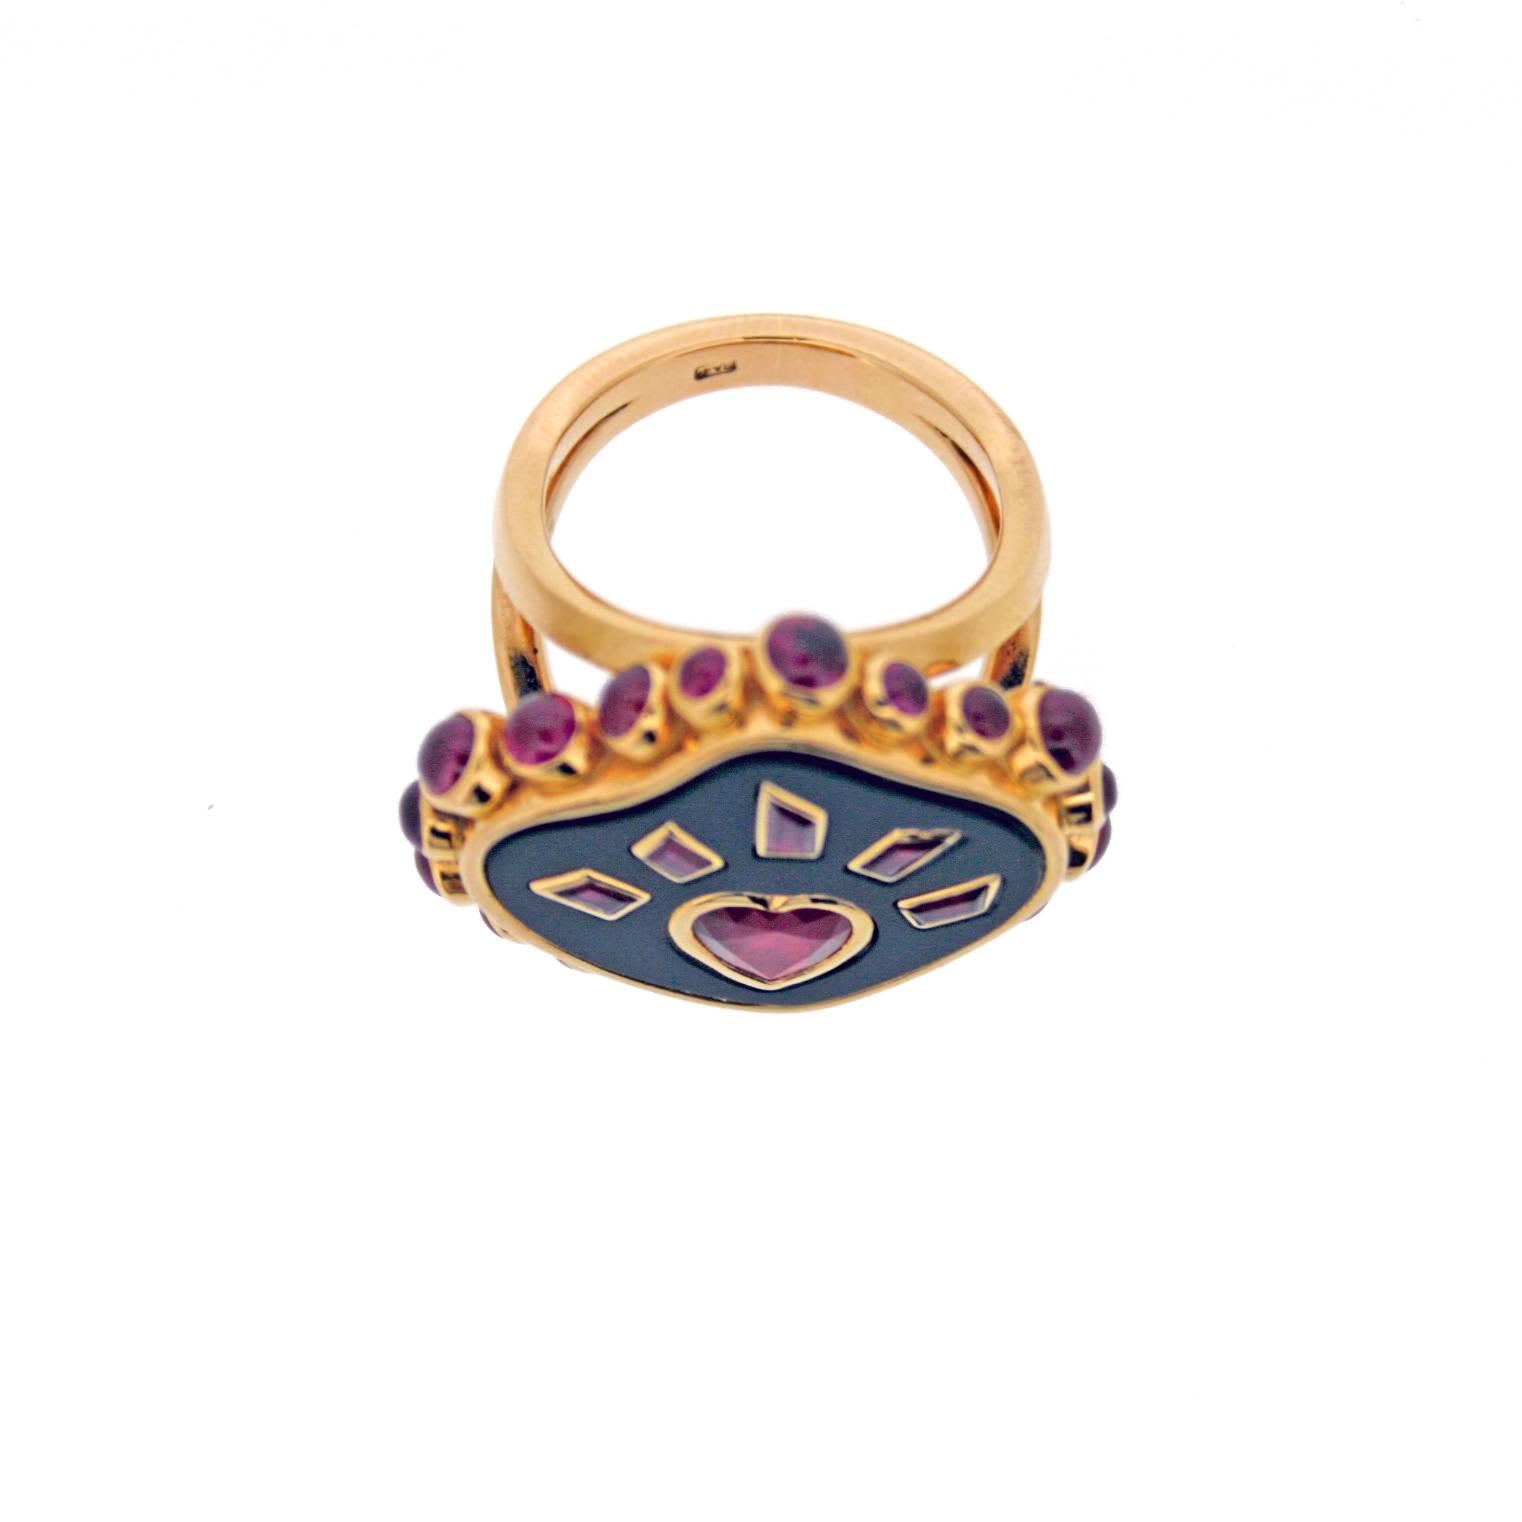 Flaming heart ring from the Cosmic collection.
Central plaque of onyx set with a graphic ruby flaming heart and rub over set cabochon rubies in 18ct polished yellow gold.
Onyx approximately 2.00cts.
Rubies approximately 3.99cts.
Finger size 50